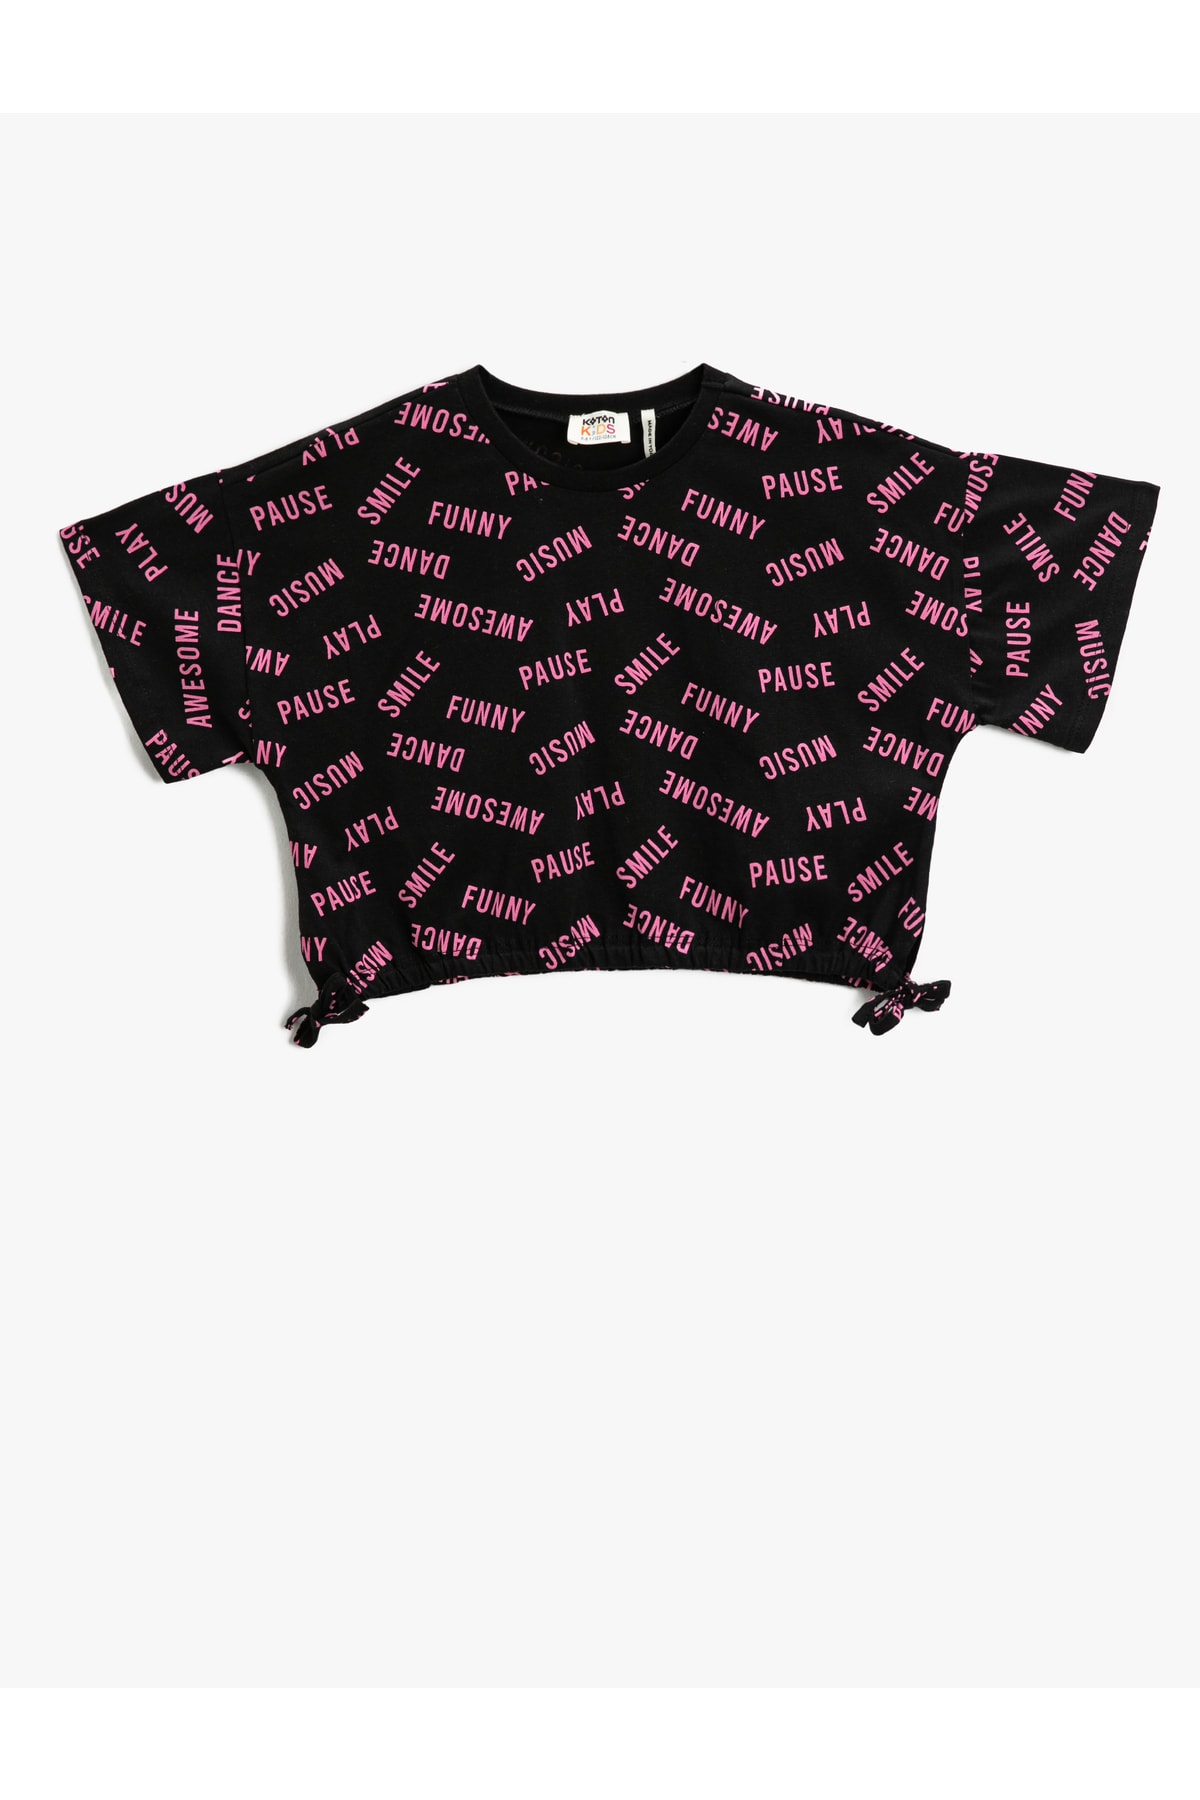 Levně Koton Oversized Crop T-Shirt Short Sleeves, Printed with Bows Detail at the Sides, Crew Neck.